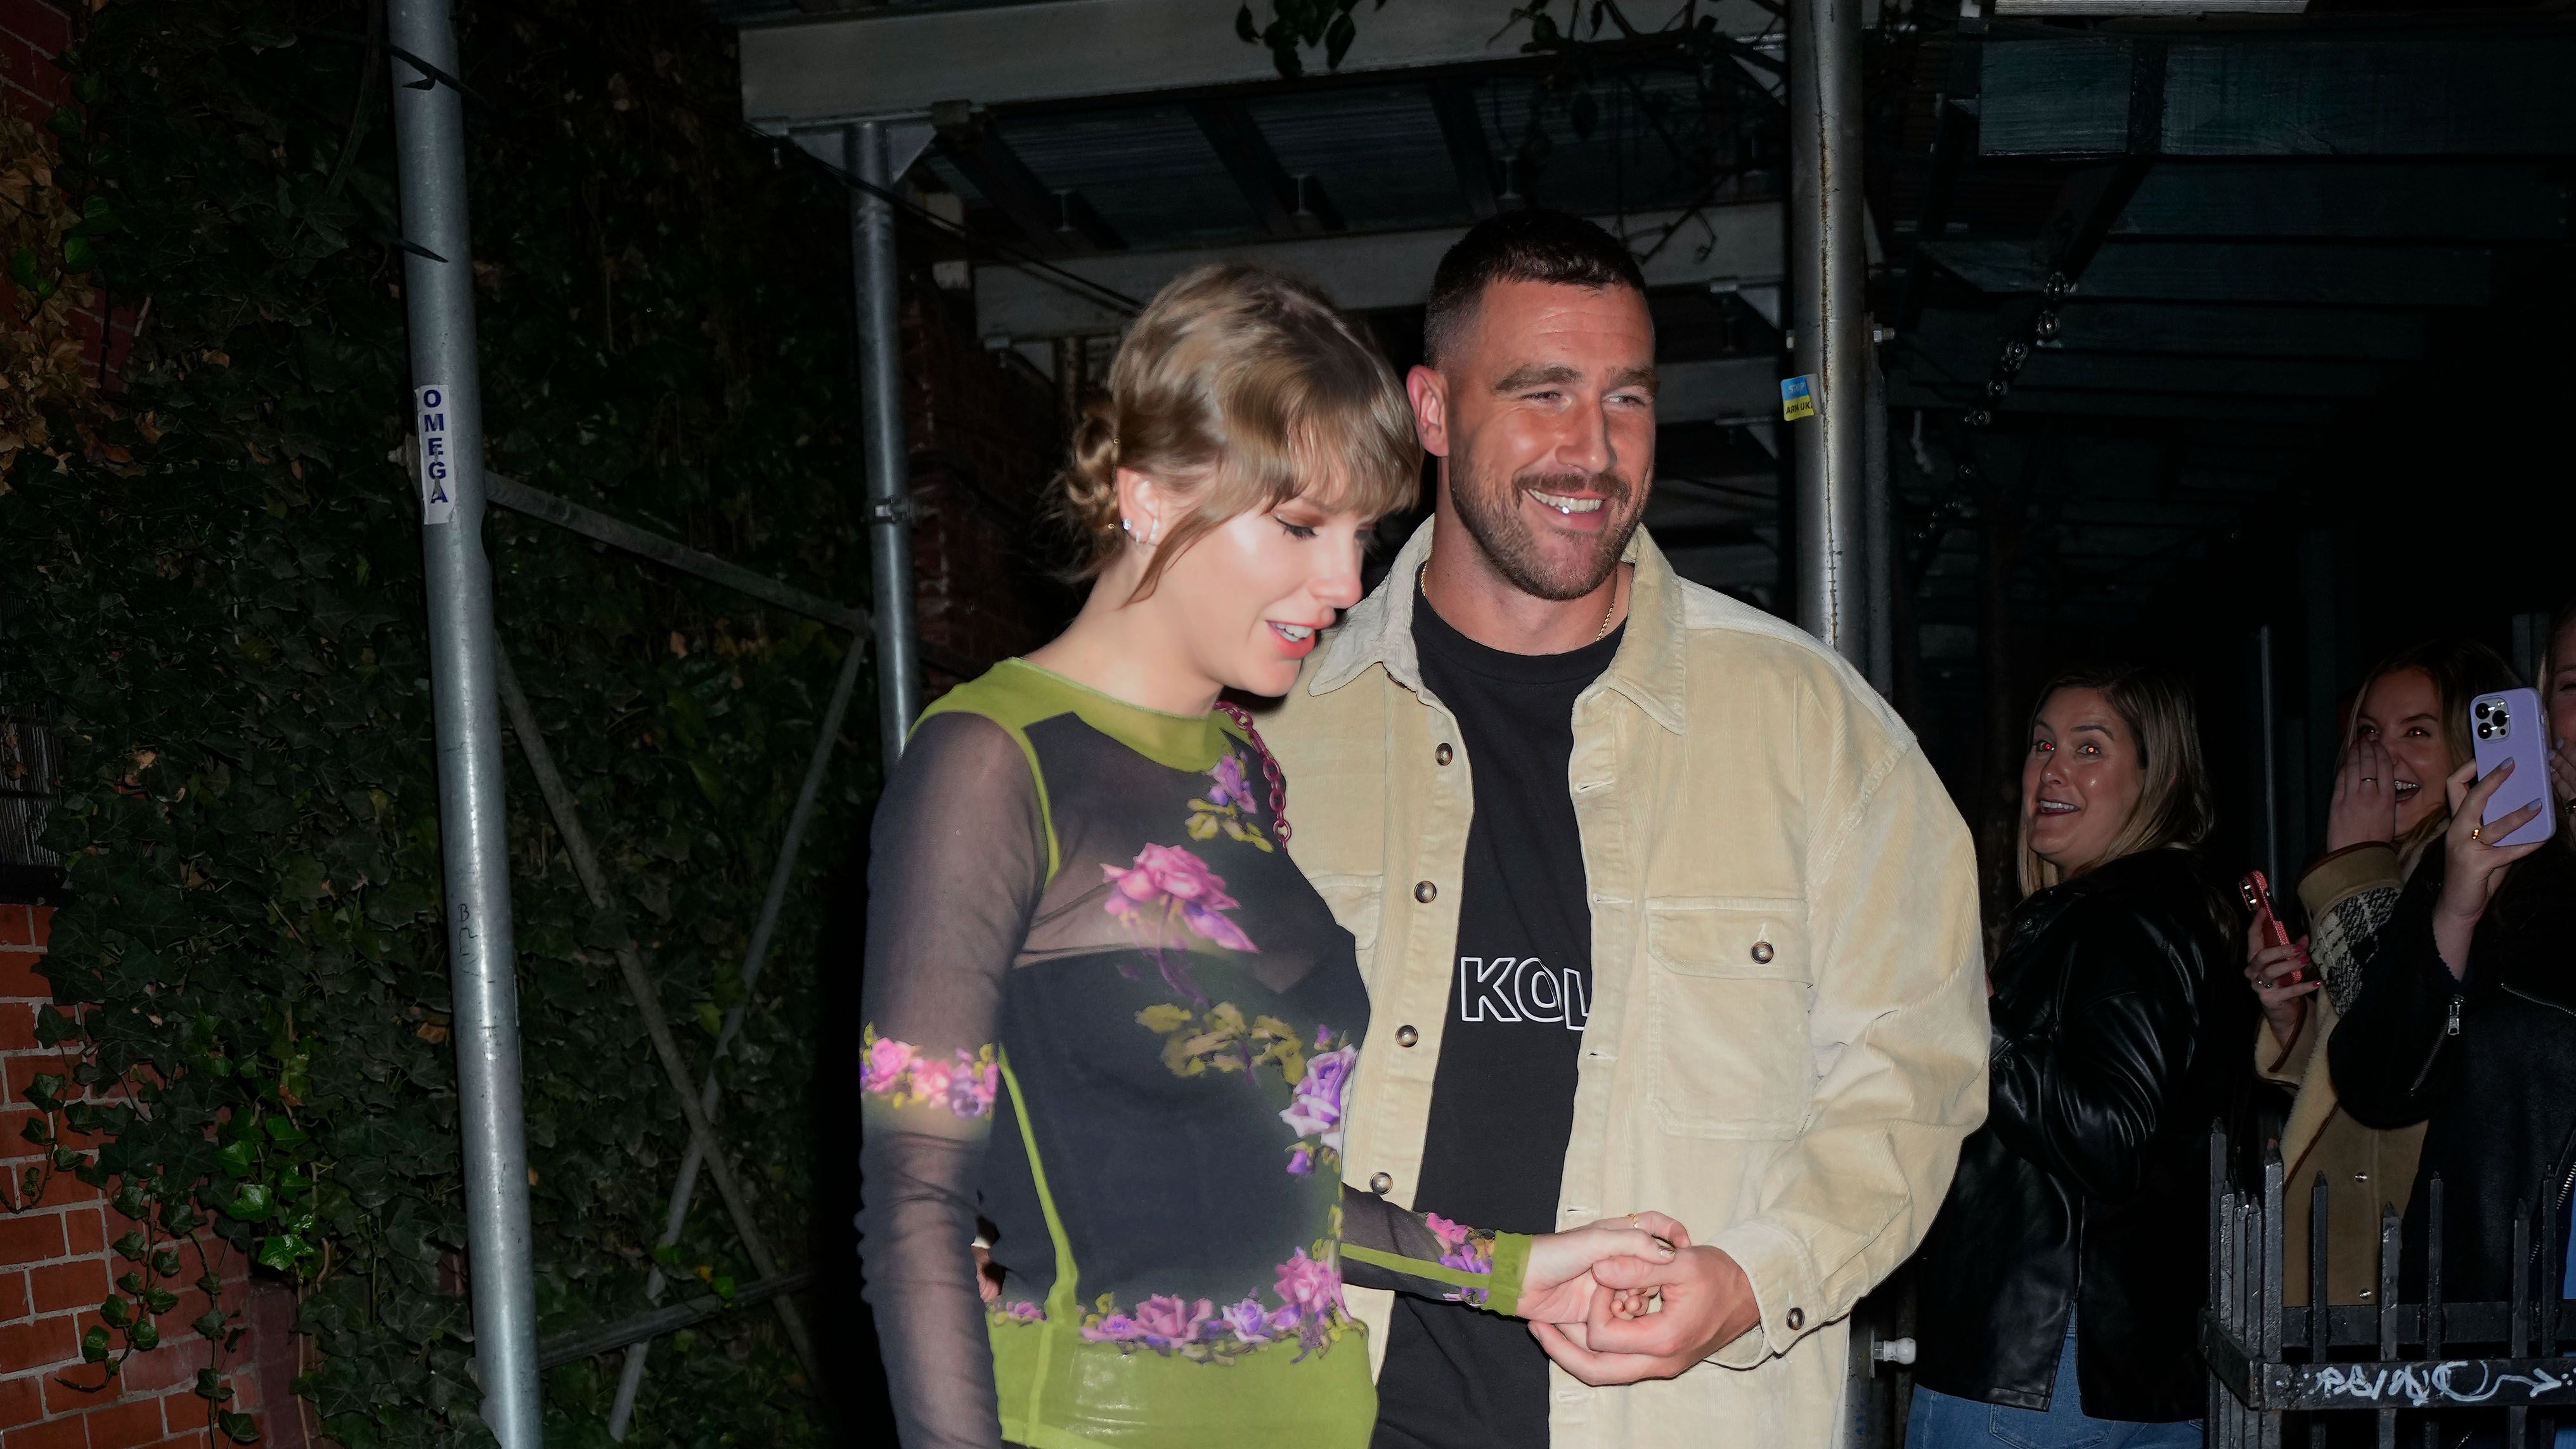 https://hips.hearstapps.com/hmg-prod/images/taylor-swift-and-travis-kelce-have-dinner-at-waverly-inn-on-news-photo-1697543078.jpg?crop=1xw:0.45709xh;center,top